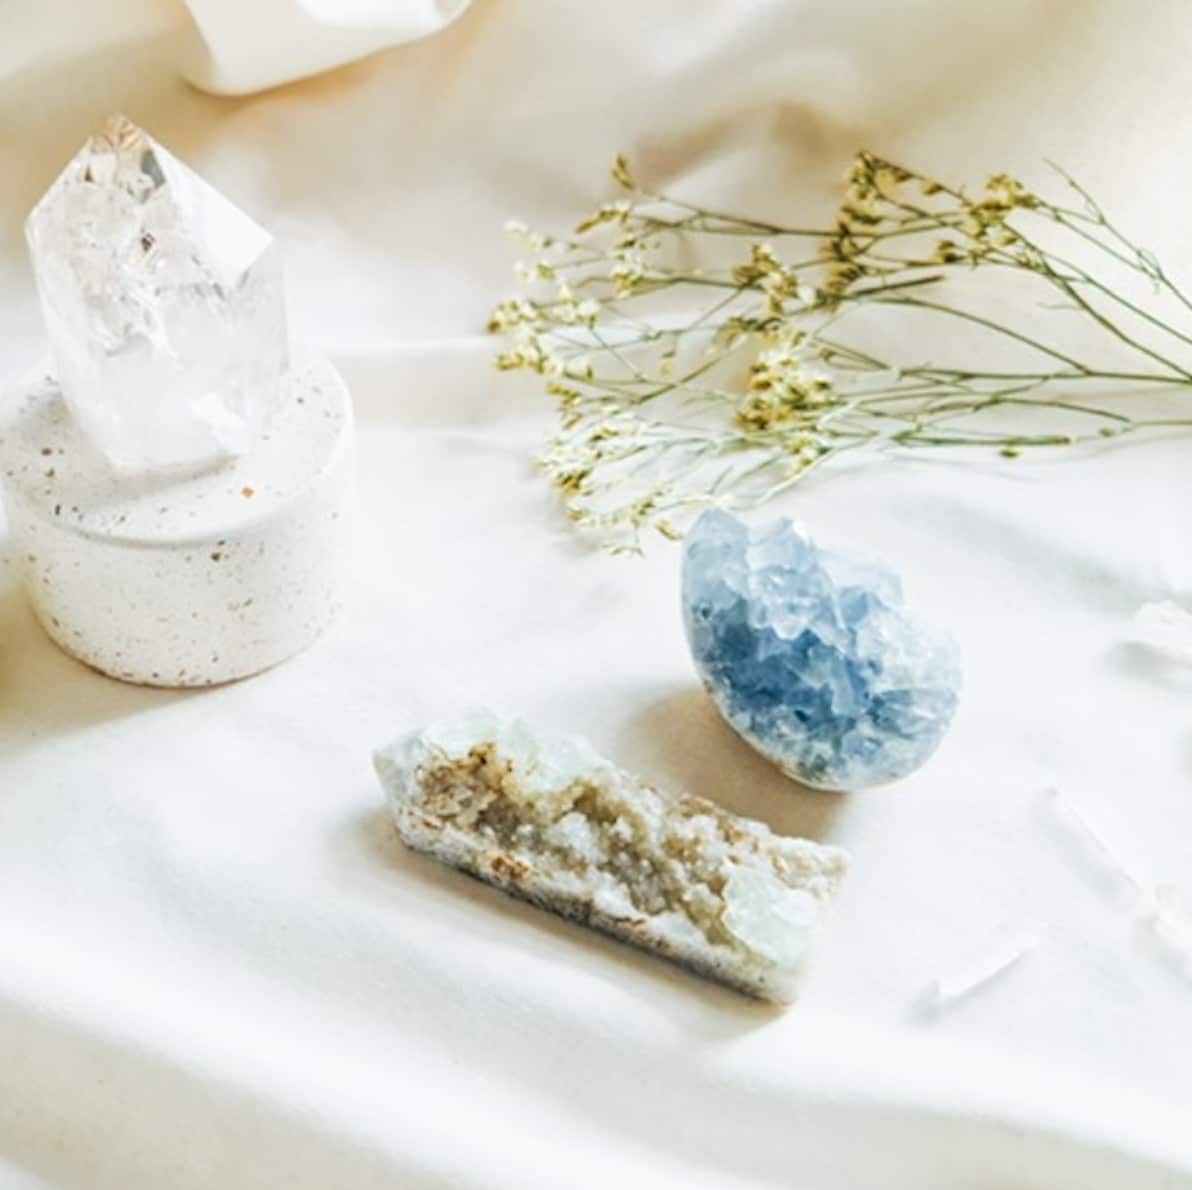 An image of a white cloth covered table with various crystals and plants honoring their energy with a DIY home altar.